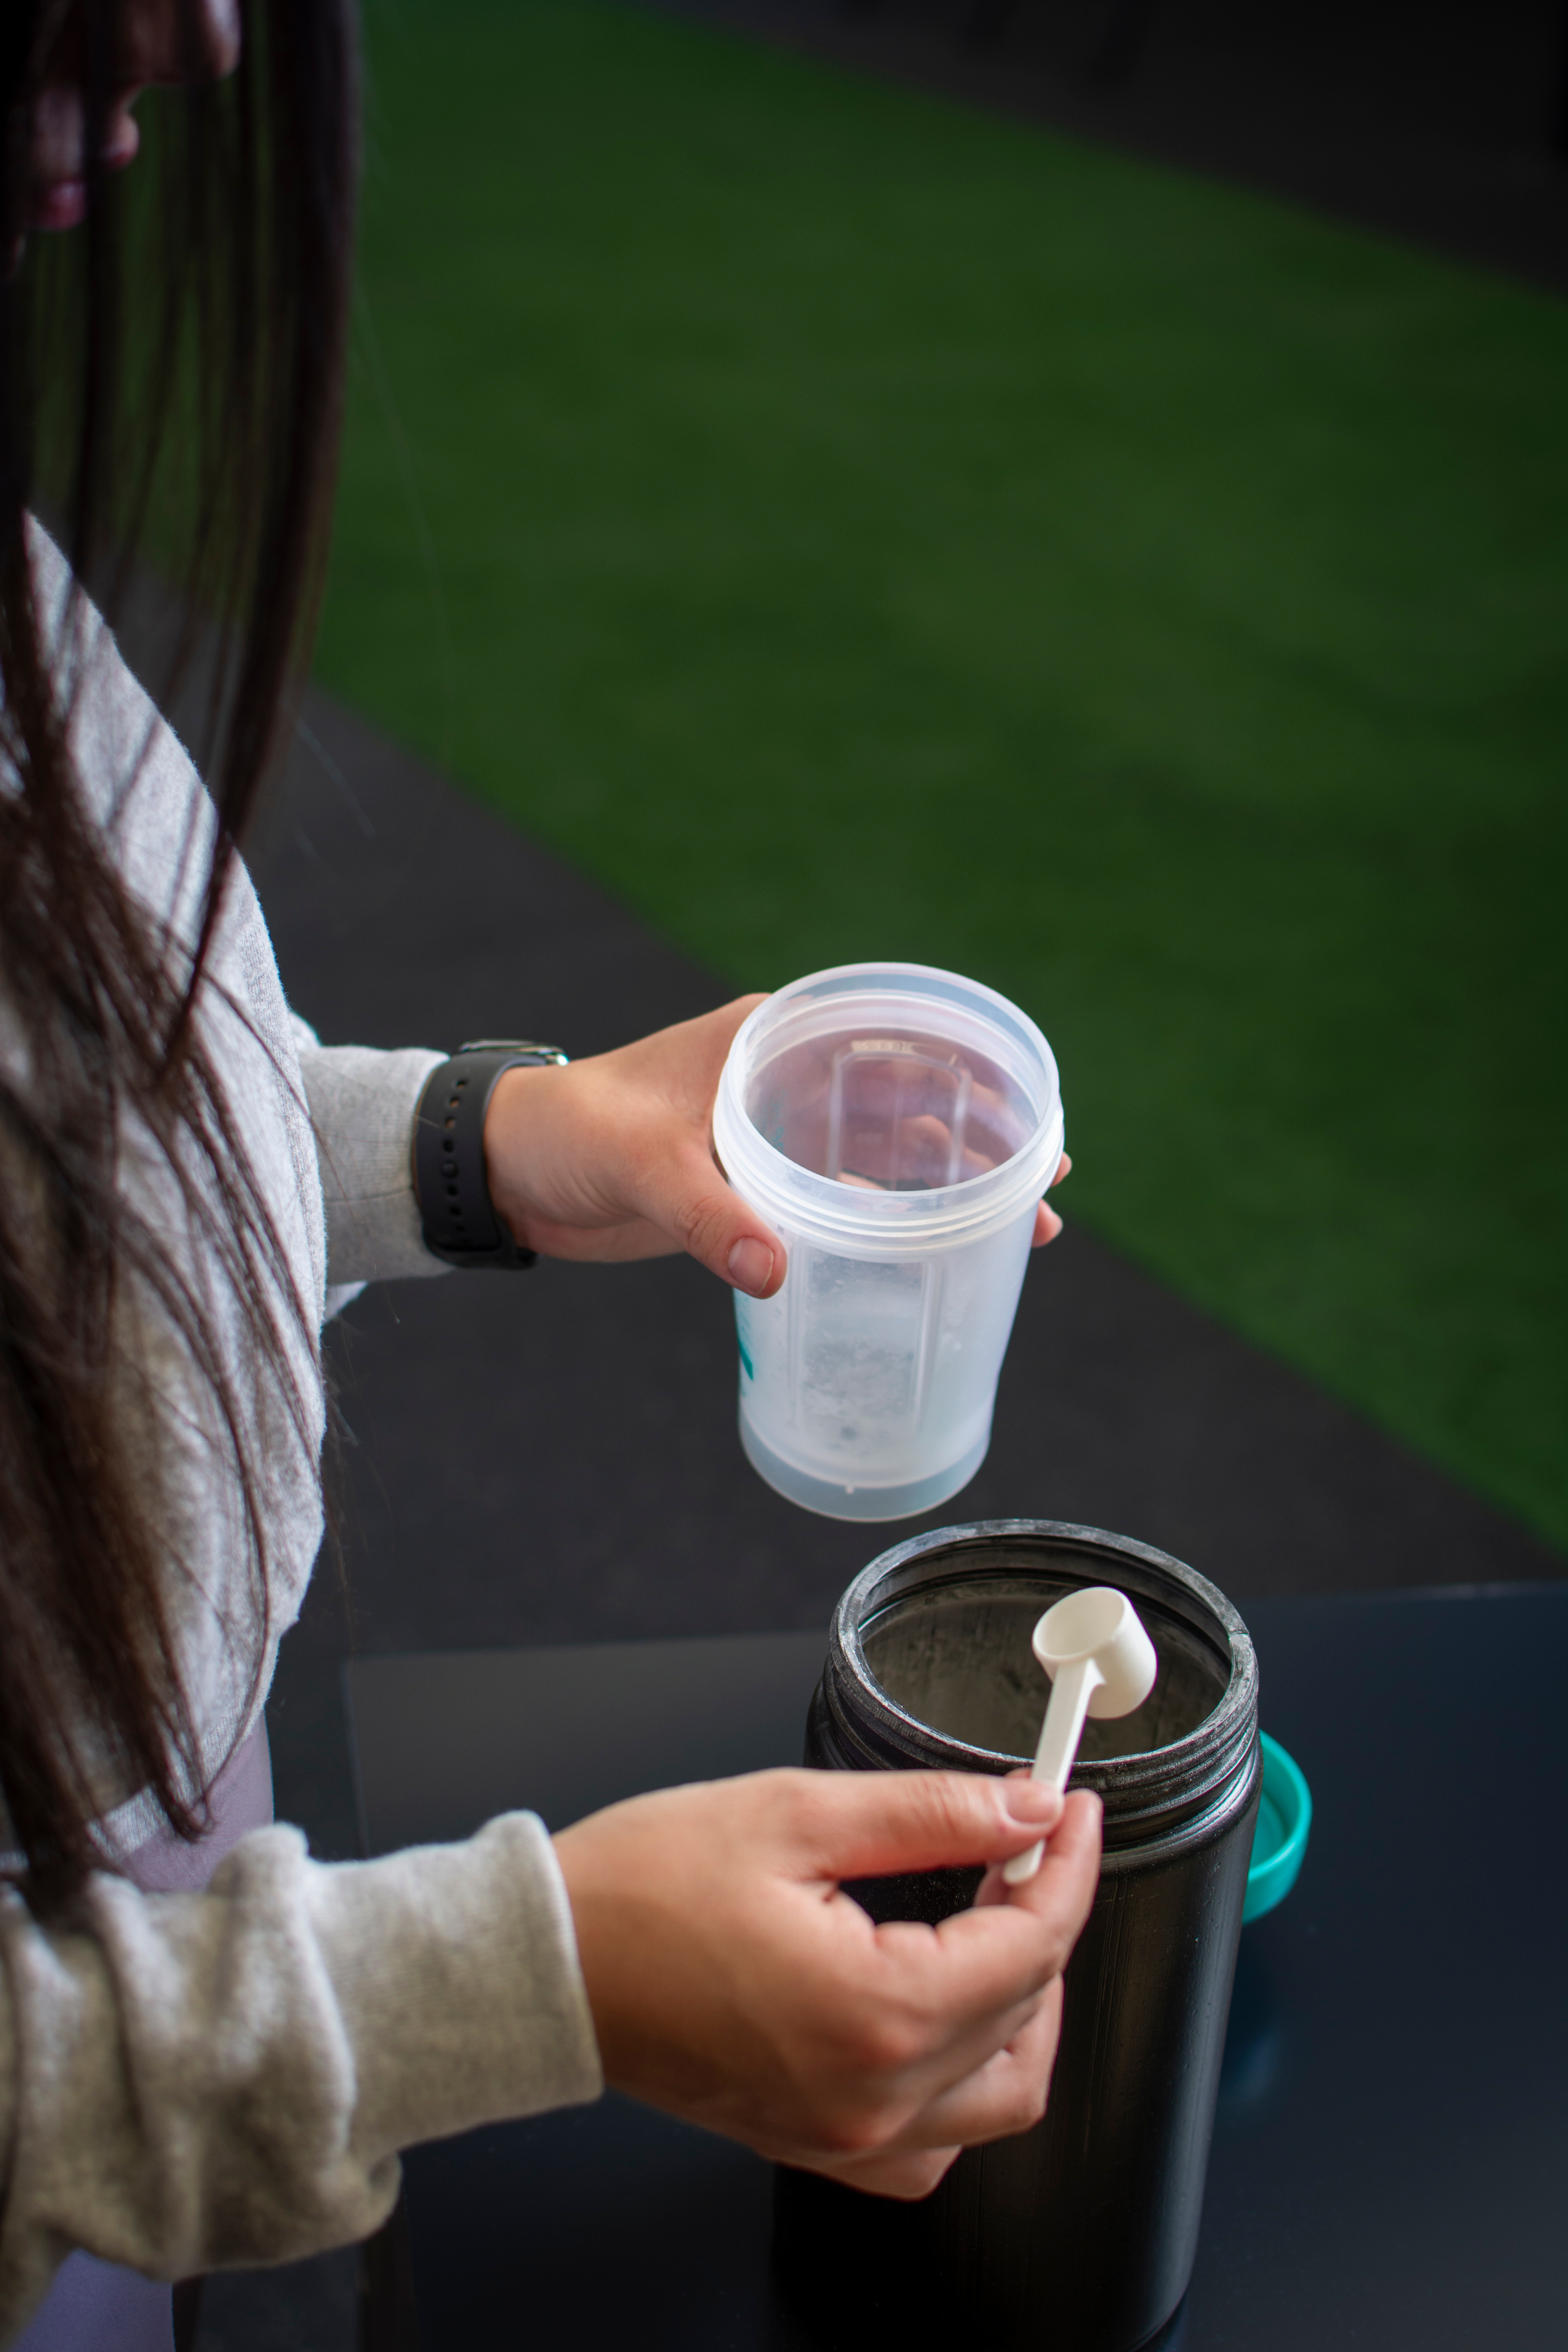 Athlete scooping a supplement into a shaker bottle after a workout.